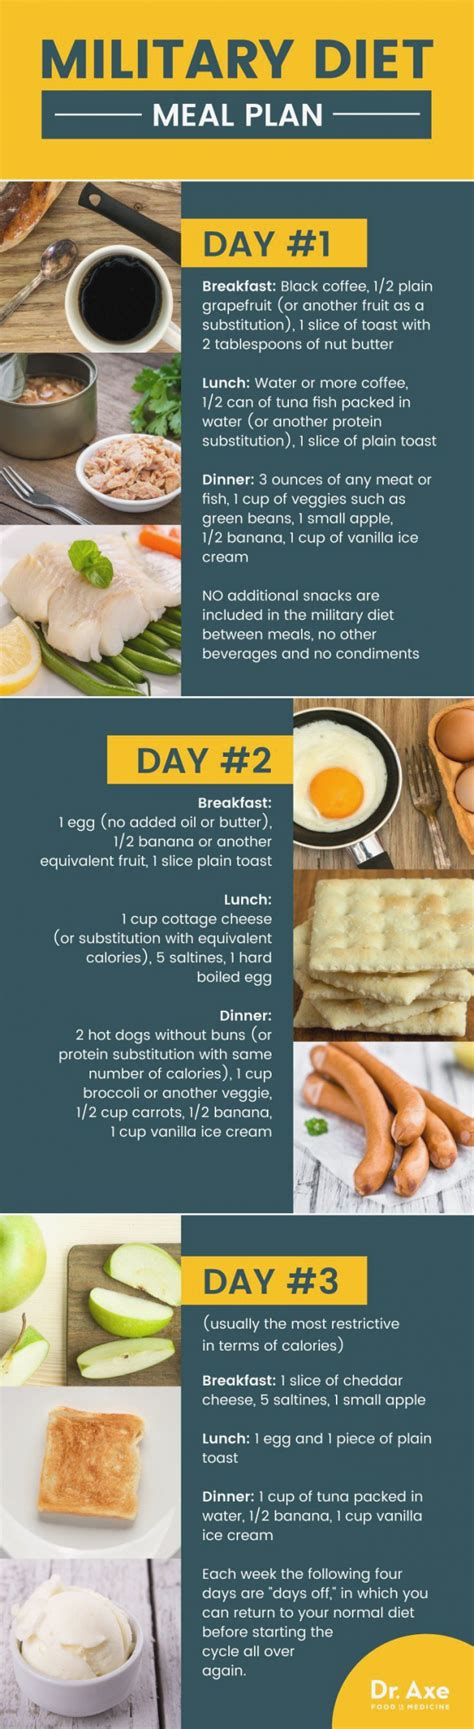 Printable 3 Day Military Diet